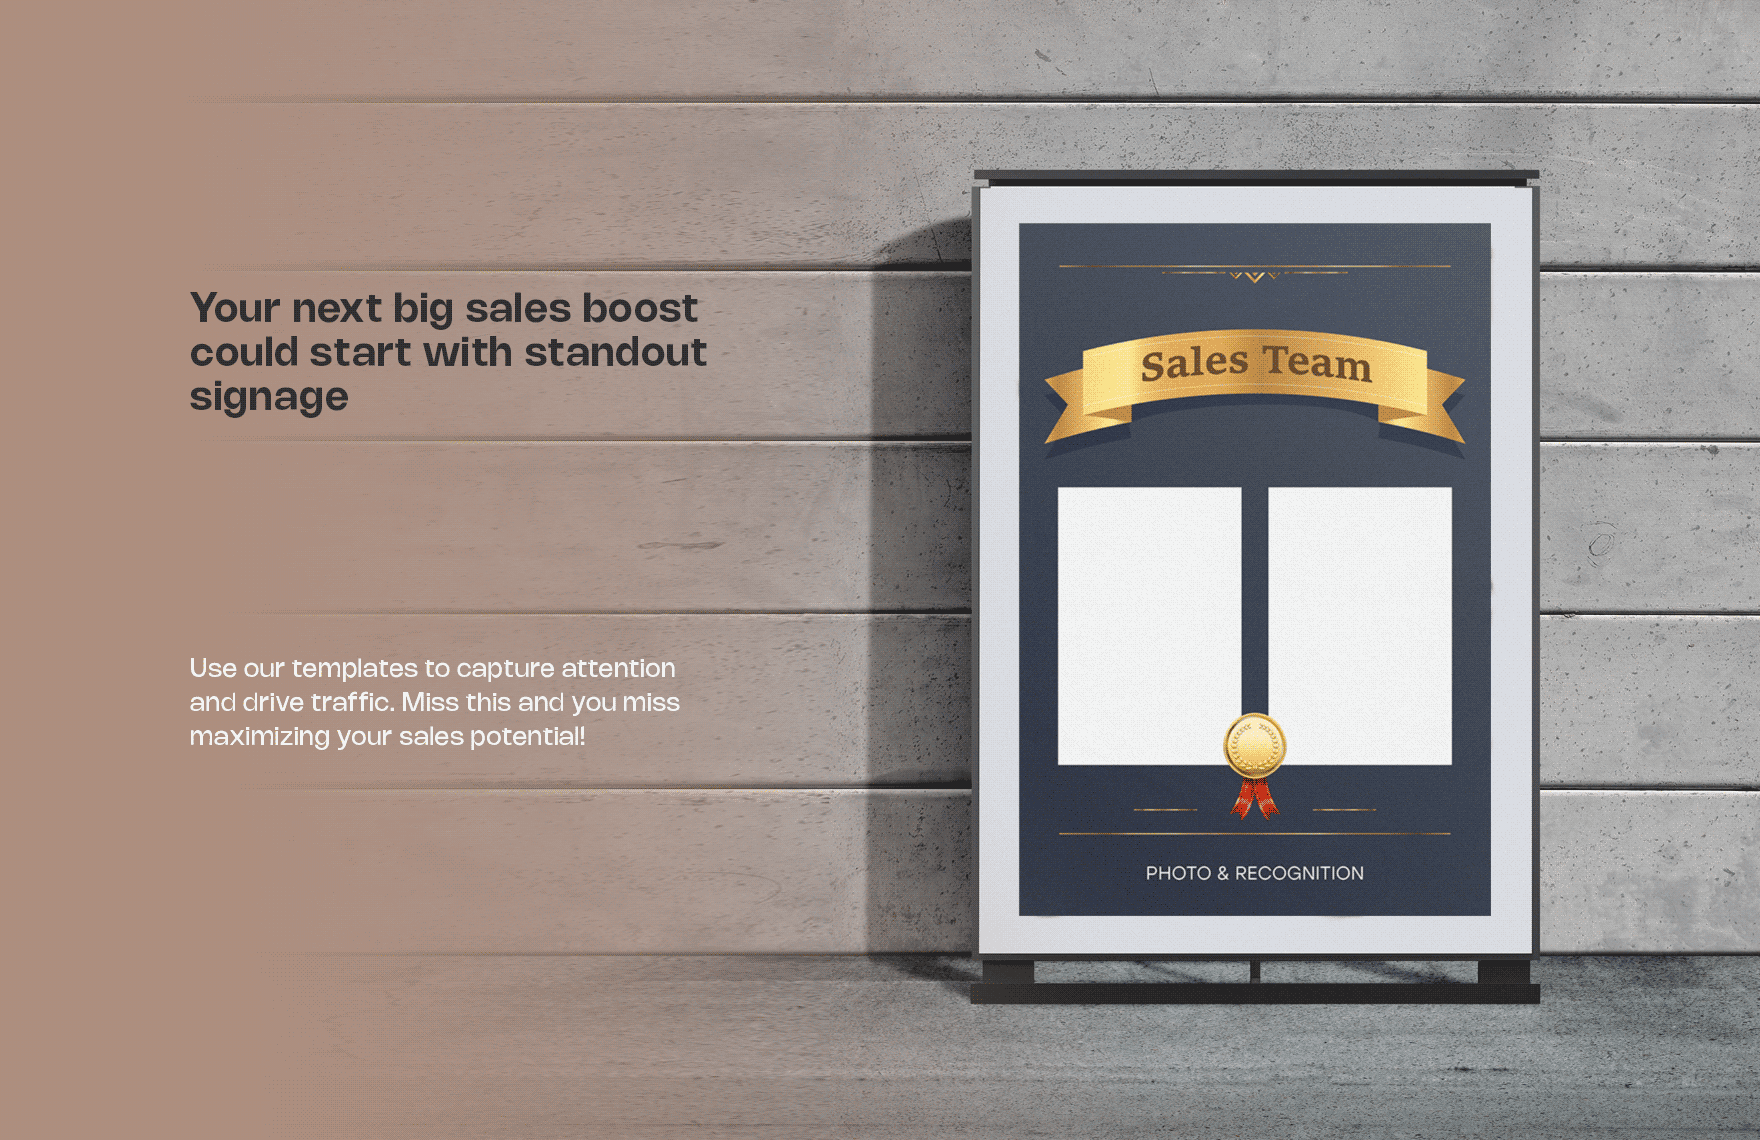 Sales Team Photo and Recognition Signage Template